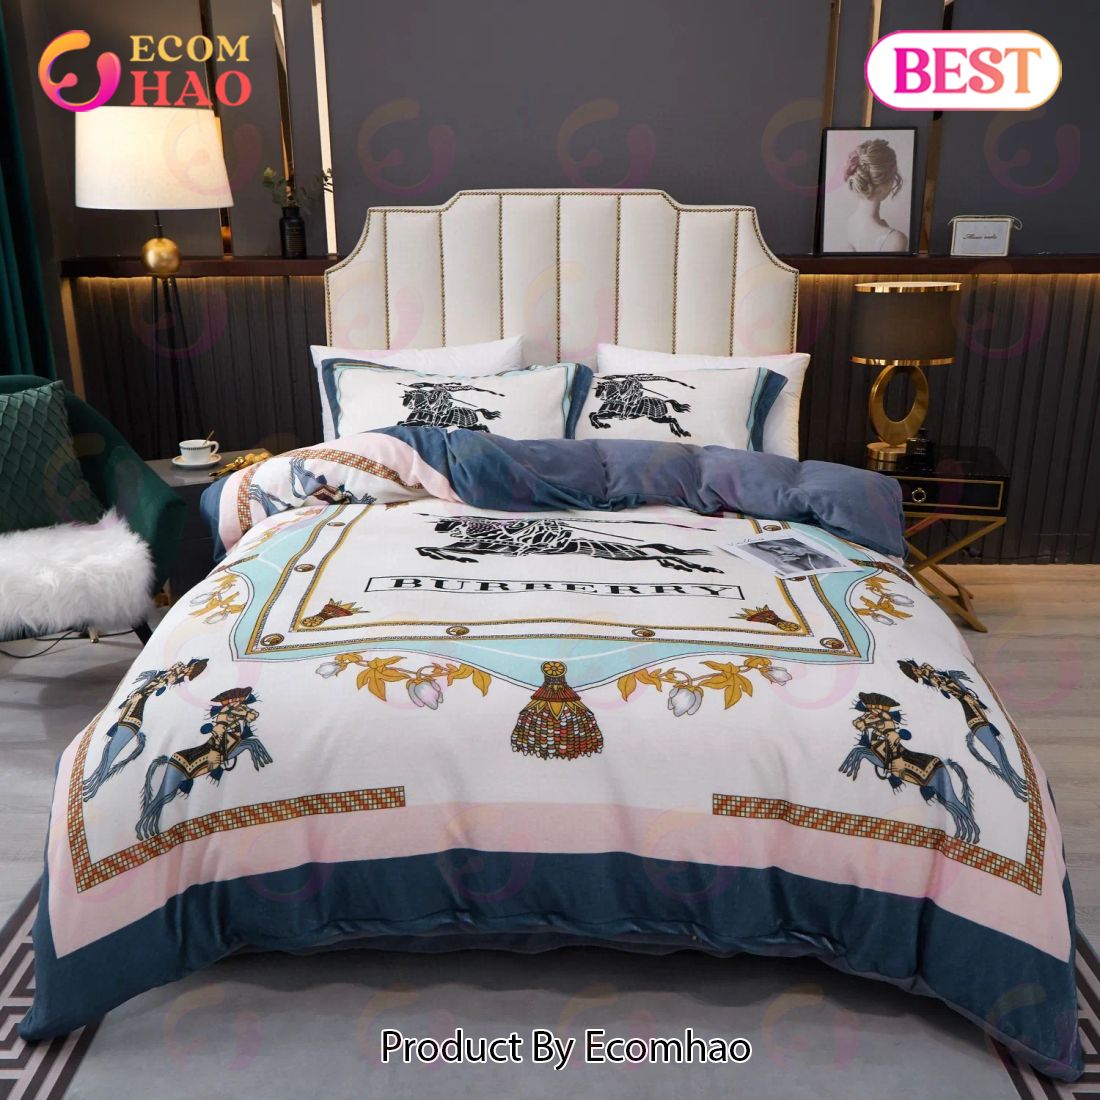 Burberry New Bedding Sets 3D Printed Bedding Sets Quilt Sets Duvet Cover Luxury Brand Bedding Decor Bedroom Sets Best Luxury Bed Sets Gift Thankgivings And Christmas